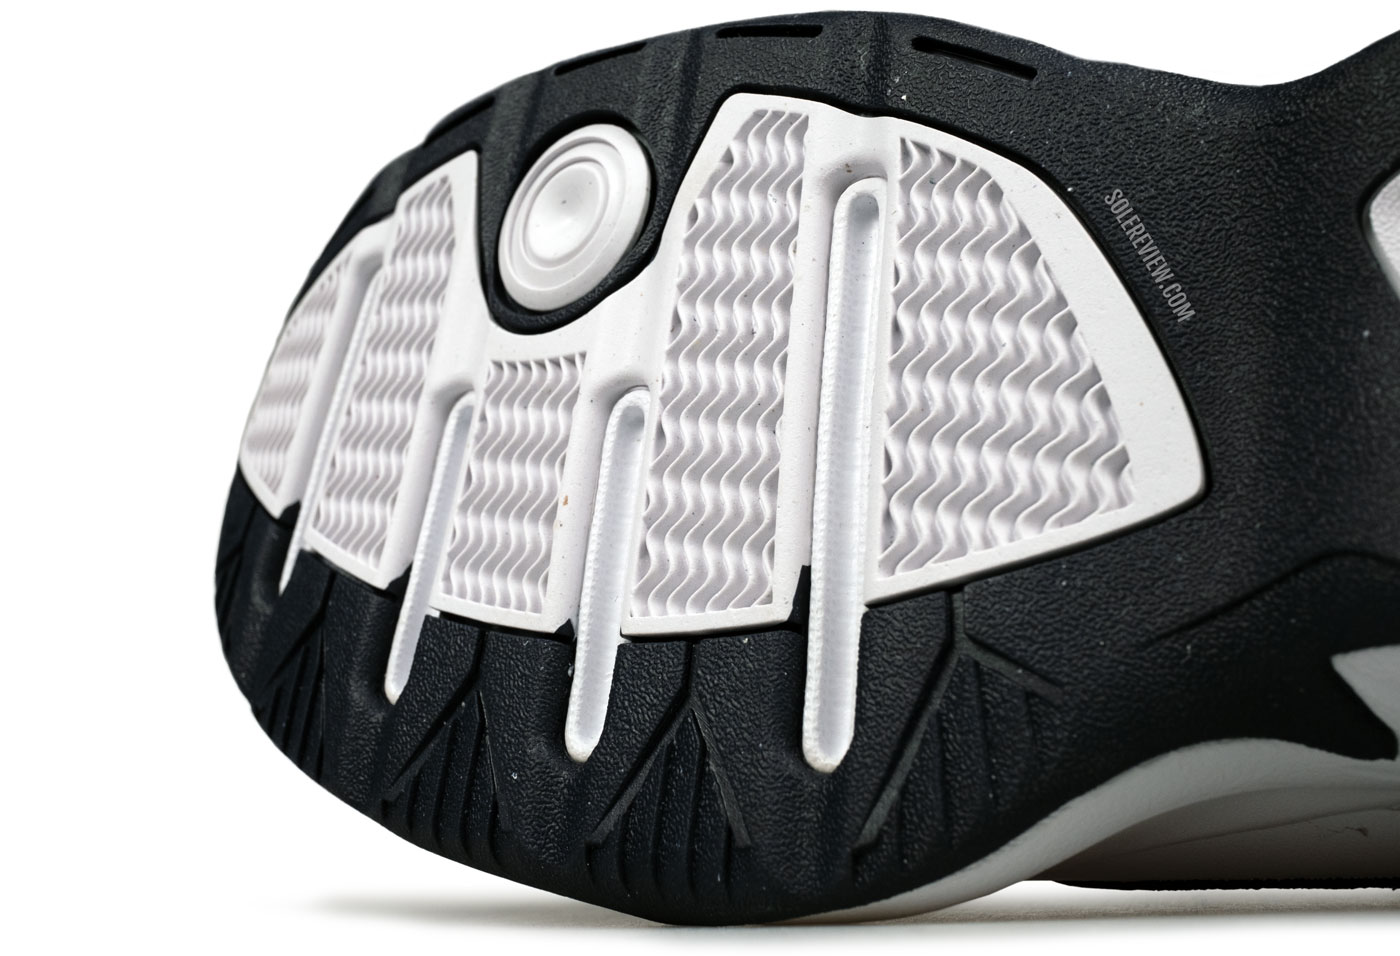 The forefoot outsole of the Nike Monarch IV.